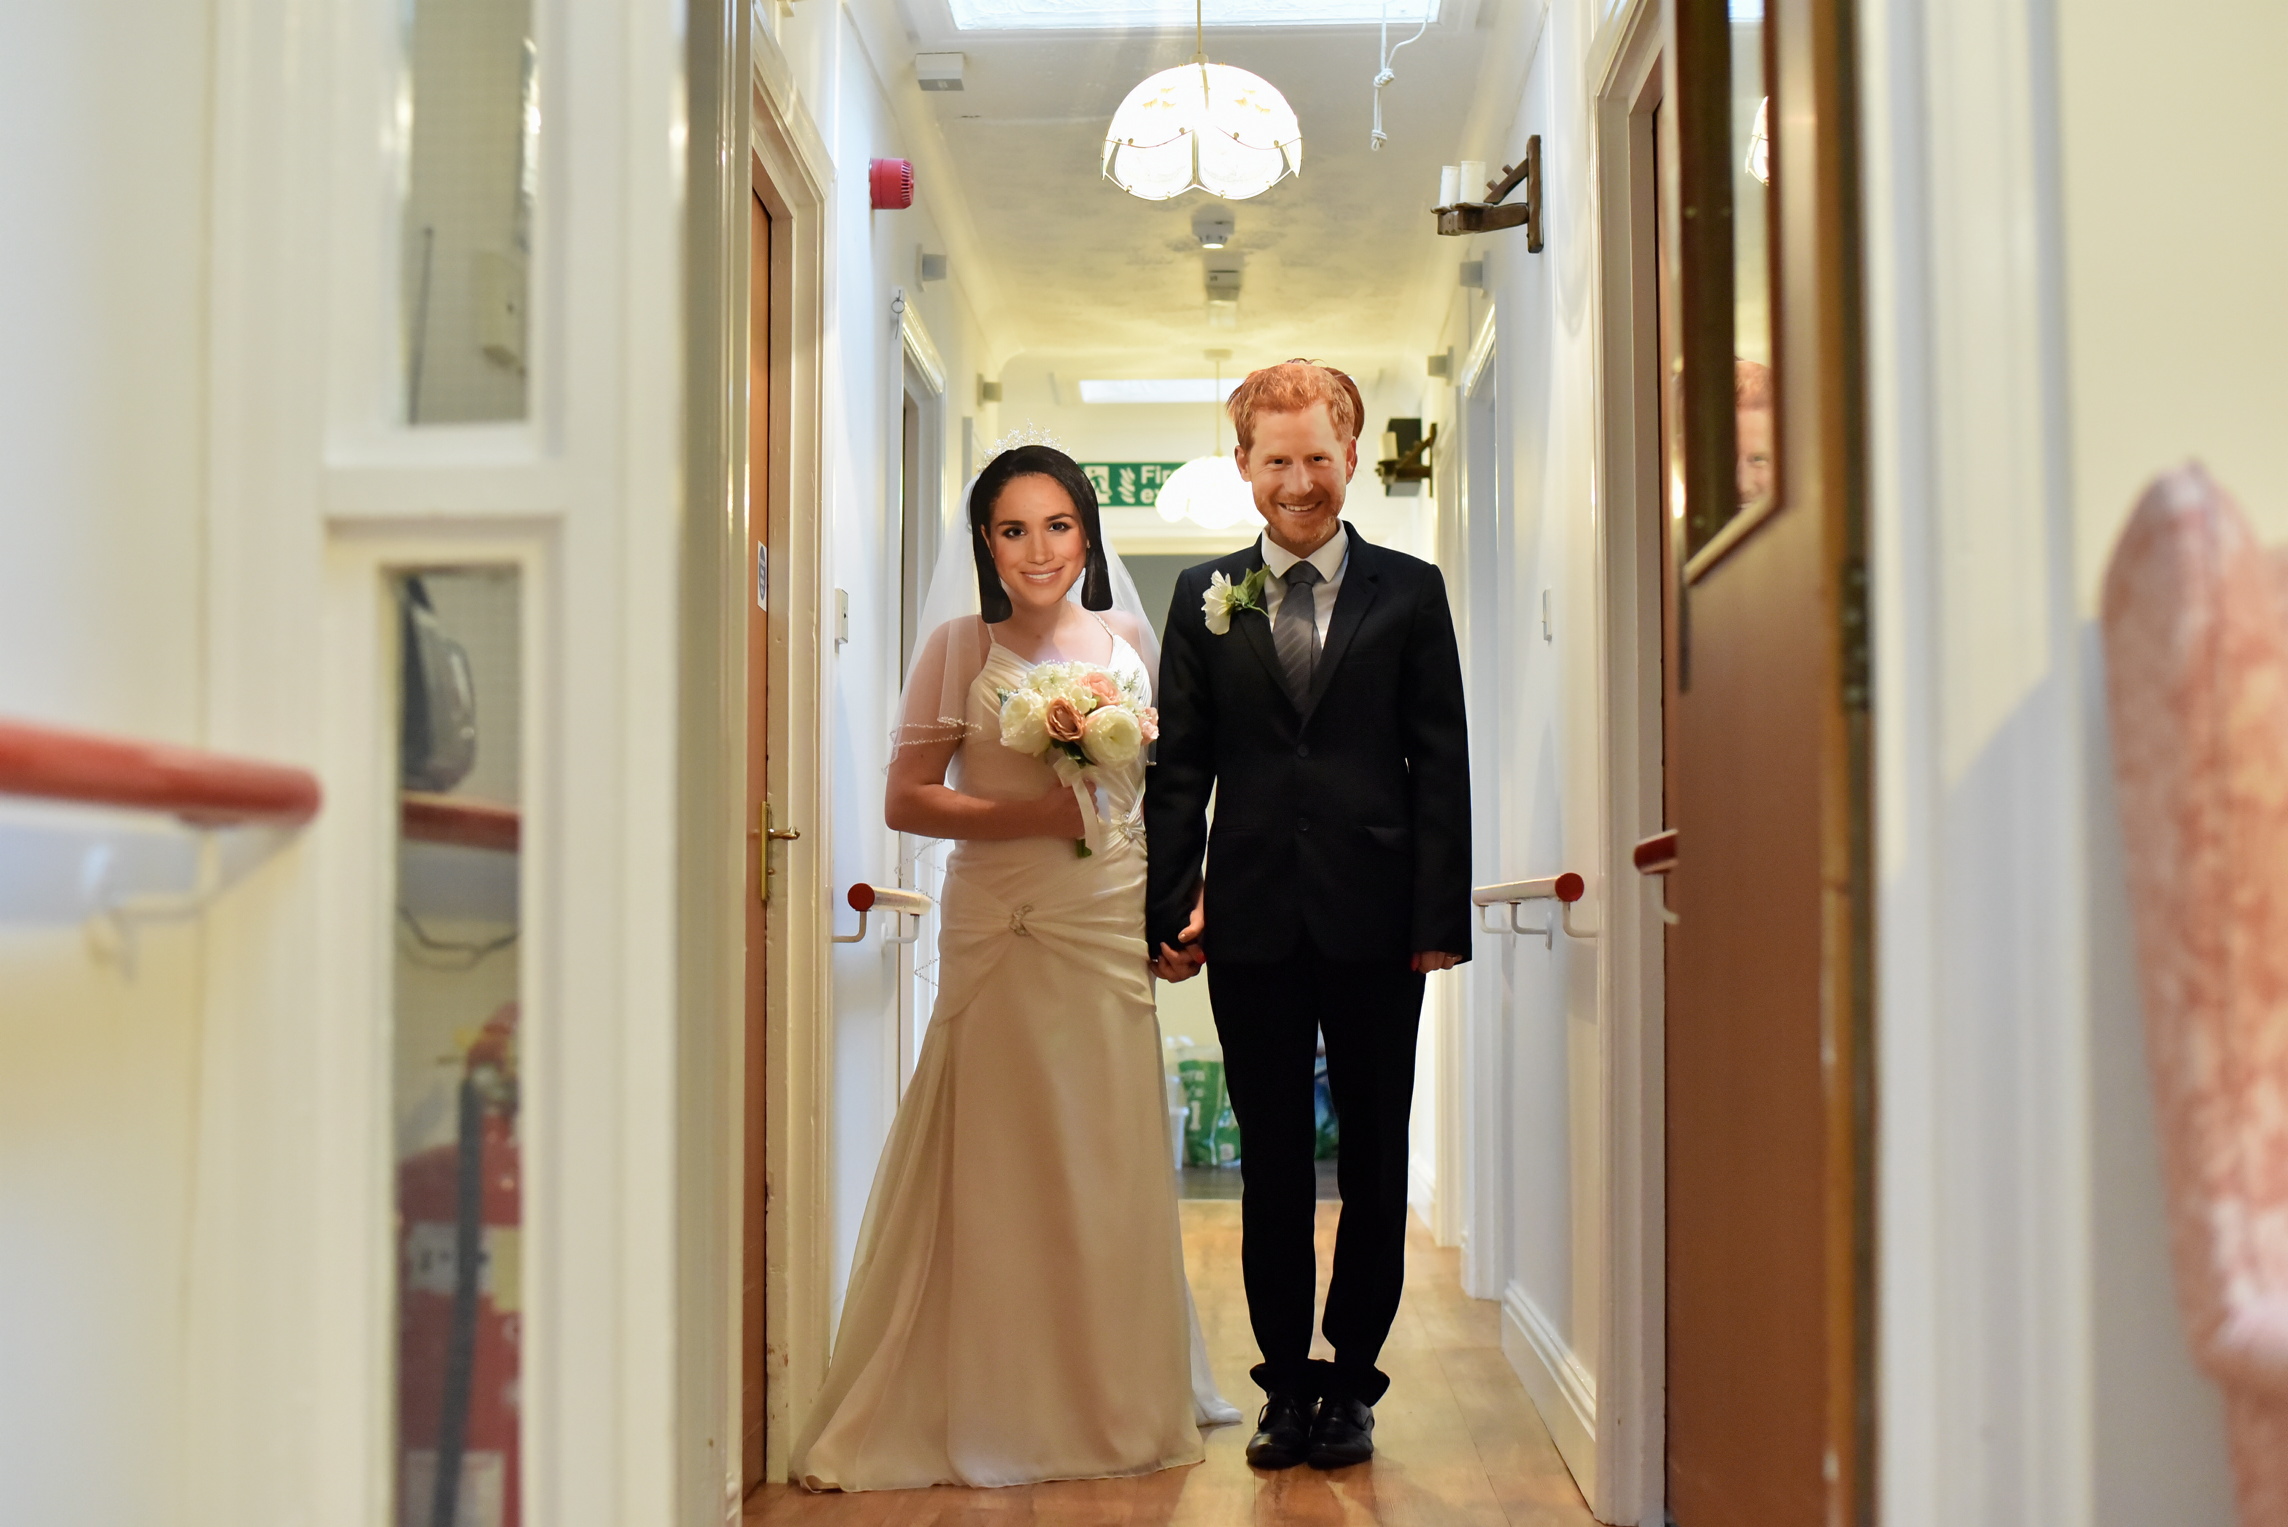 Care home poised to greet “royalty” as it stages Harry and Meghan wedding